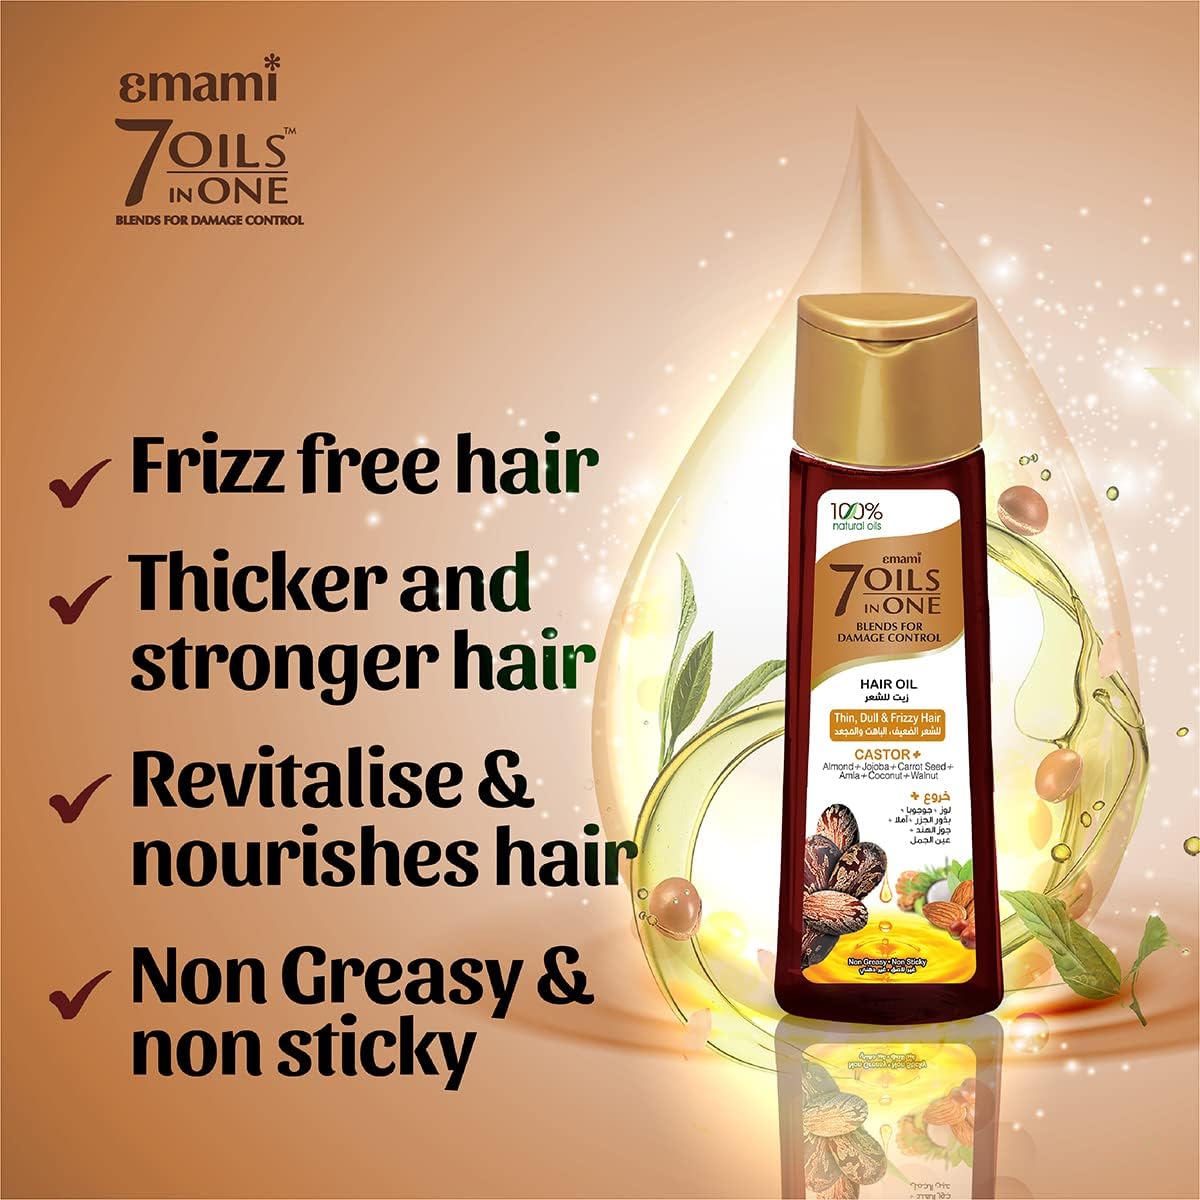 Emami 7 oils in 1 Blends with Castor Oil   200 ml